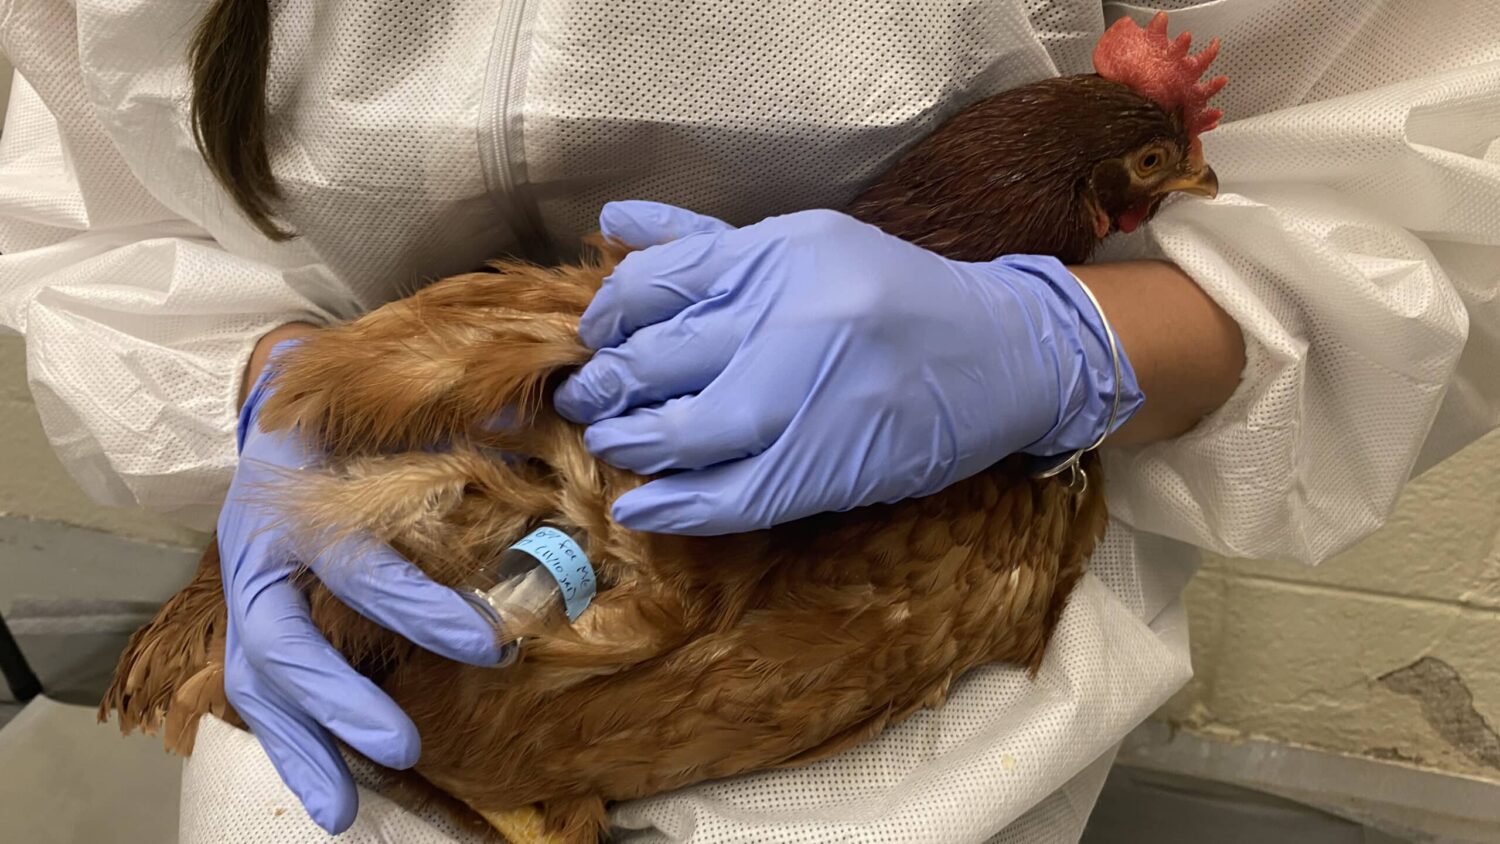 Chicken used to test drugs' effectiveness in killing bed bugs.